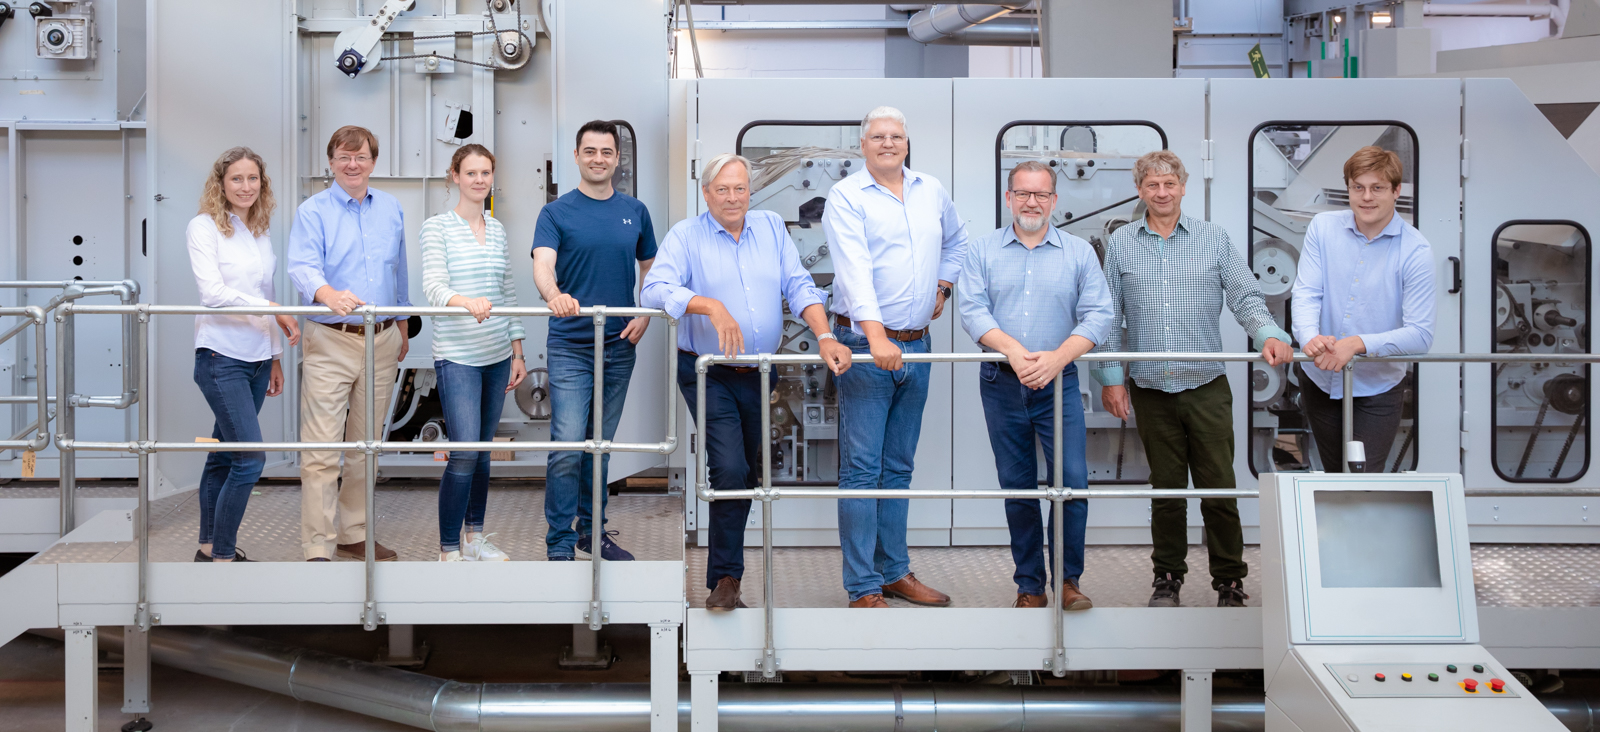 Members of the BFT/FVT-team in front of the new installed  textile processing facility